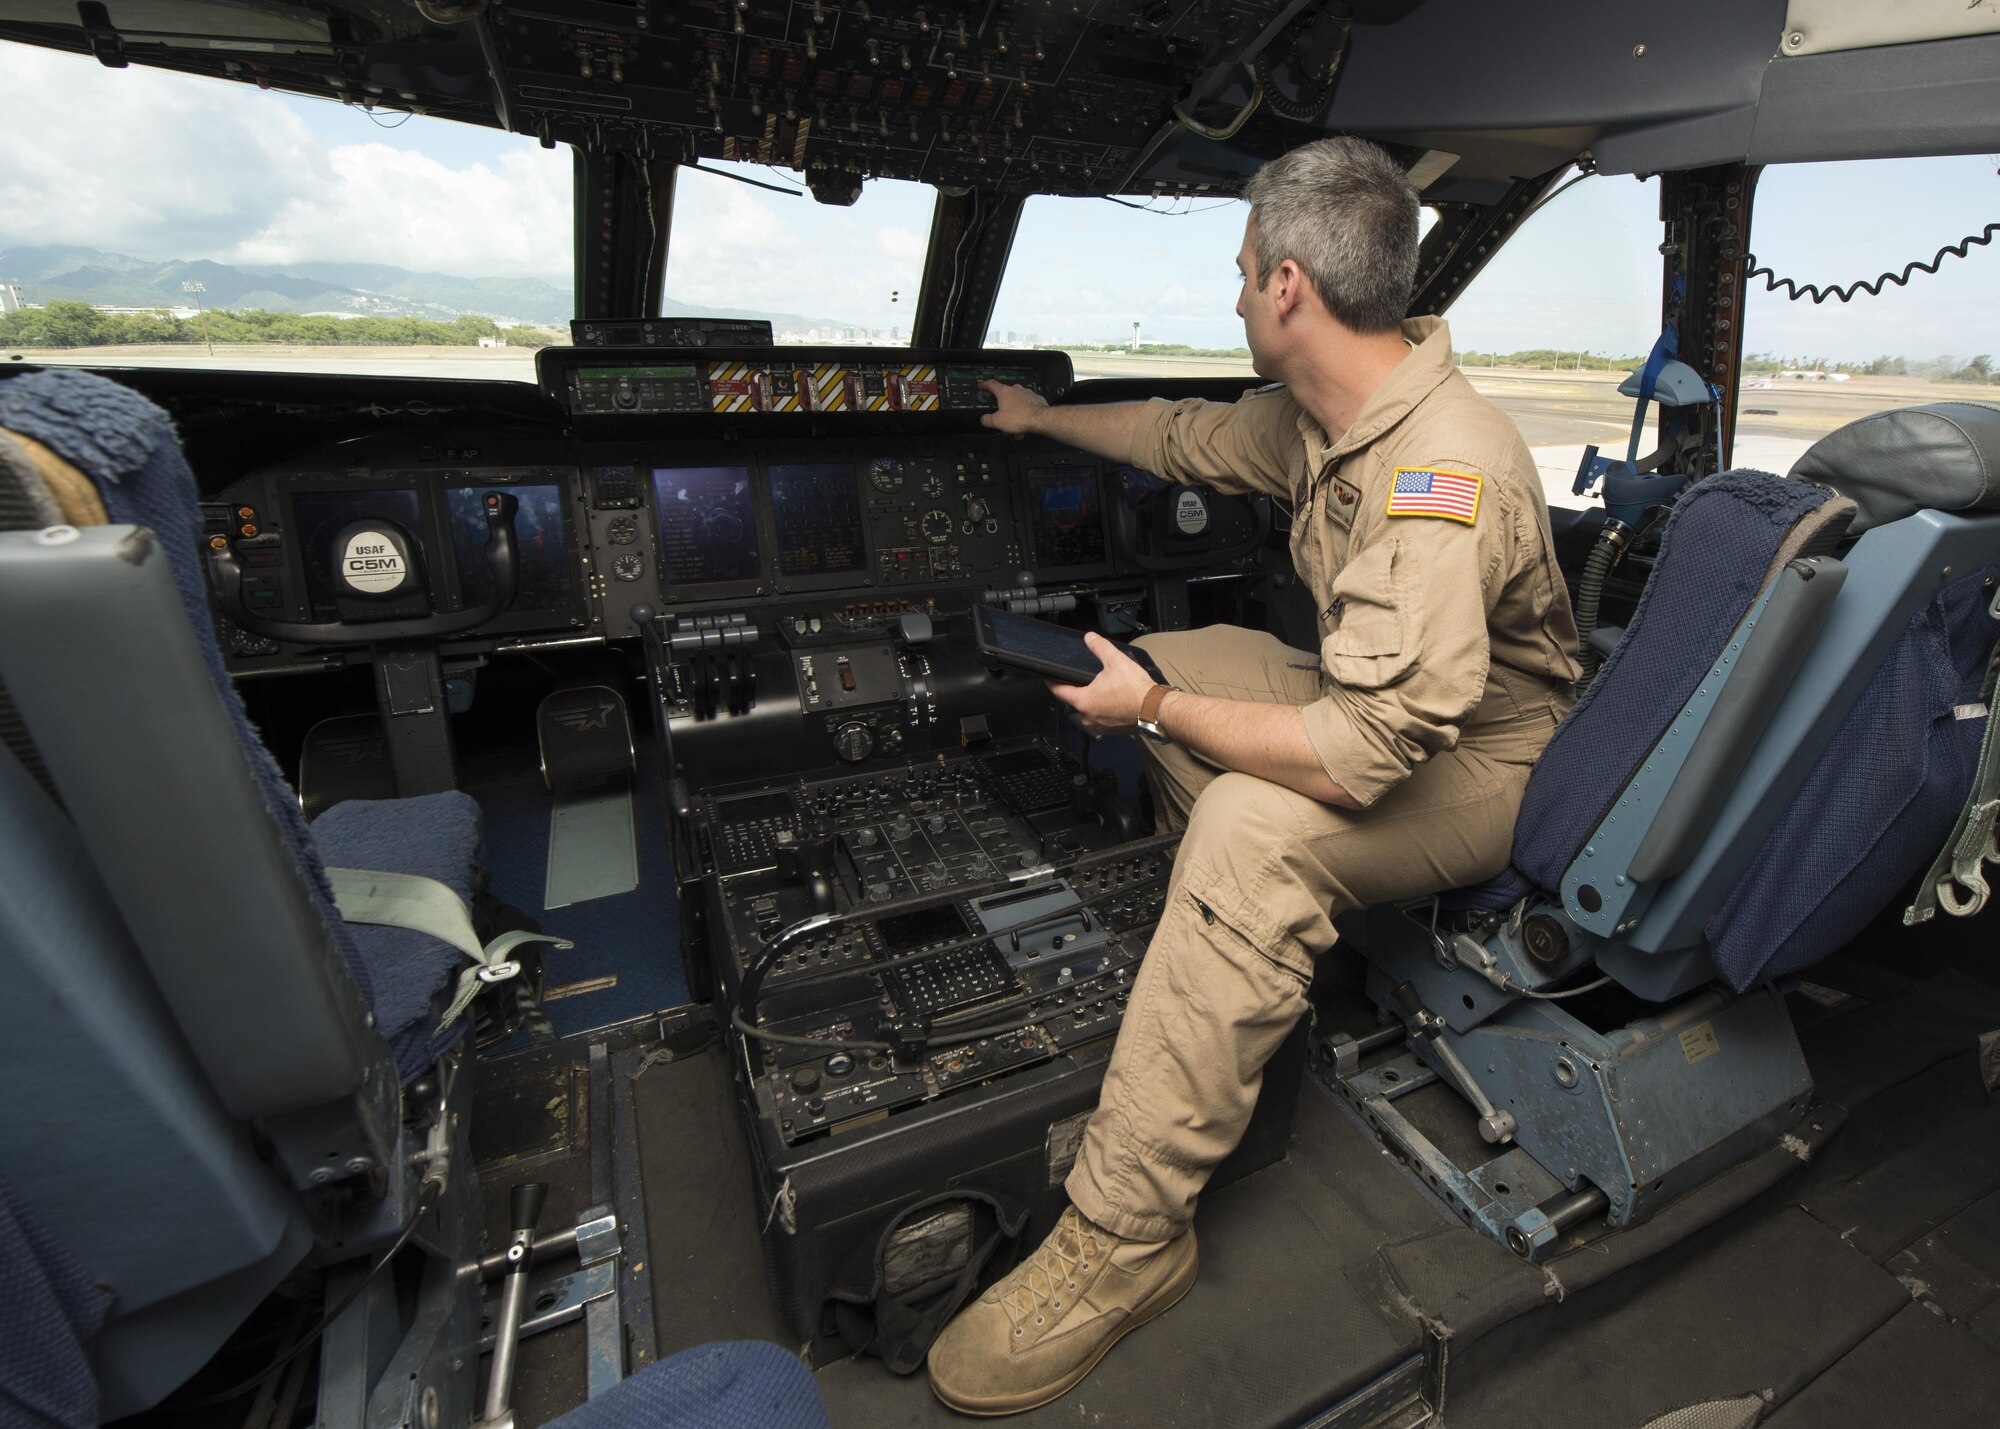 Senior Airman Dominick Lignelli, 9th Airlift Squadron flight engineer, conducts pre-flight procedures prior to take-off May 23, 2016, inside a C-5M Super Galaxy’s flight deck on Joint Base Pearl Harbor-Hickam, Hawaii. Flight engineers are responsible for operating, monitoring and maintaining an aircraft’s systems while in flight. (U.S. Air Force photo/Senior Airman Zachary Cacicia)